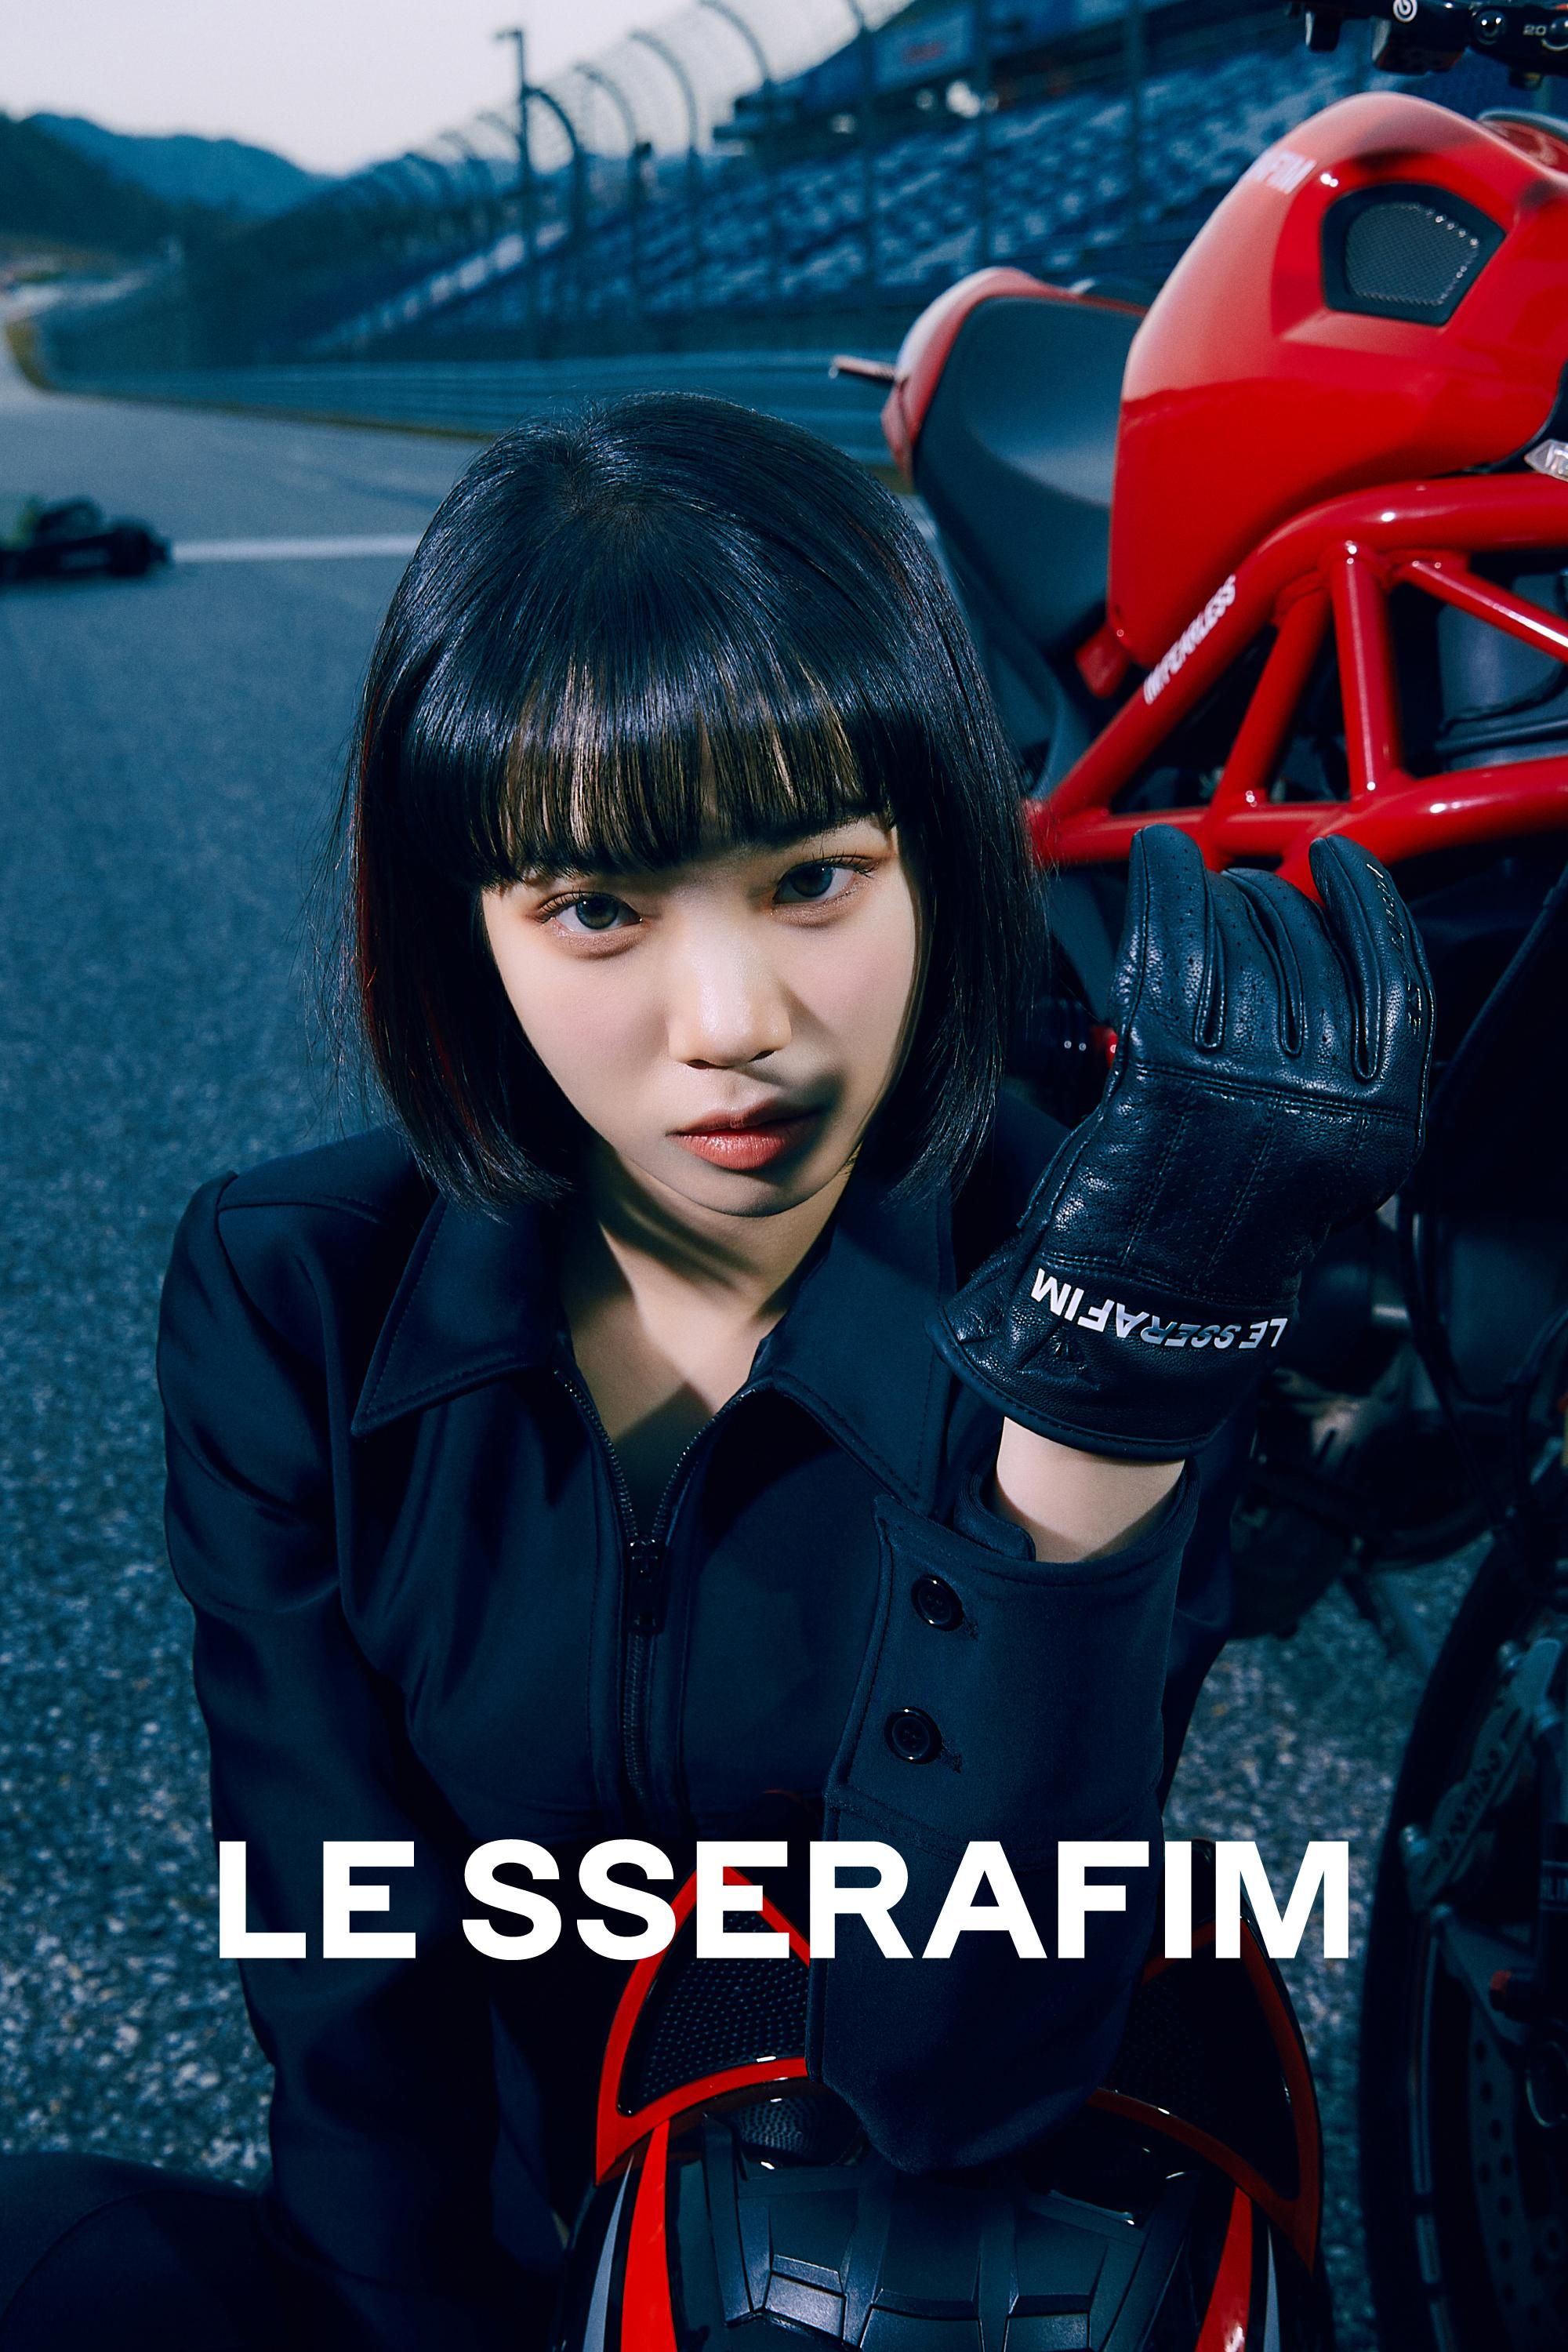 Update: HYBE's New Girl Group LE SSERAFIM Shows Off Their Moves In Dazzling New MV Teaser For “FEARLESS”